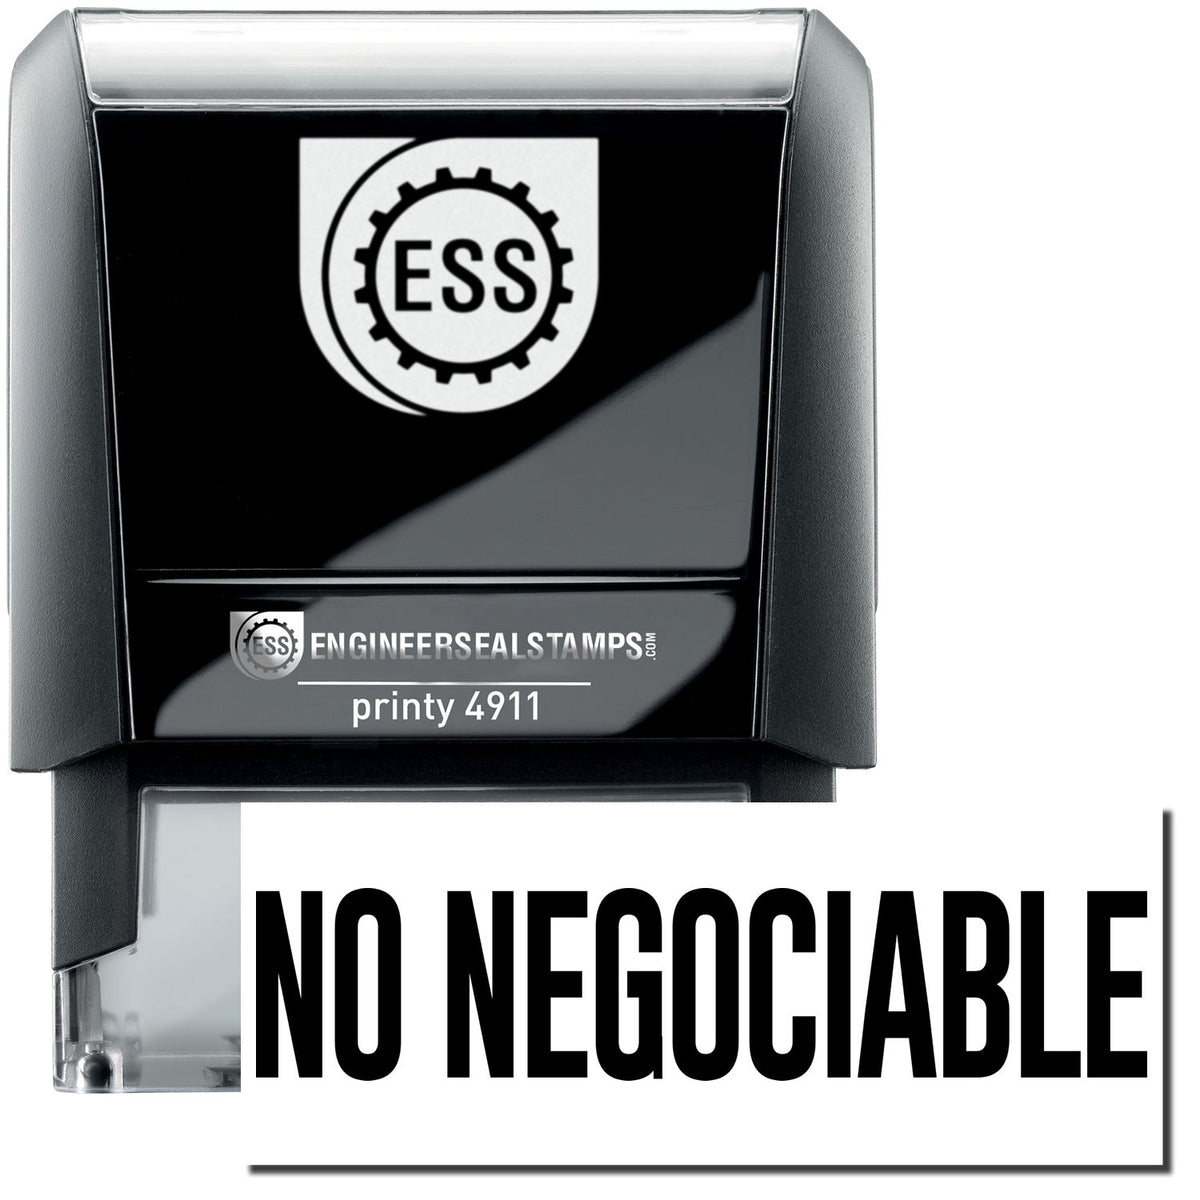 A self-inking stamp with a stamped image showing how the text &quot;NO NEGOCIABLE&quot; is displayed after stamping.